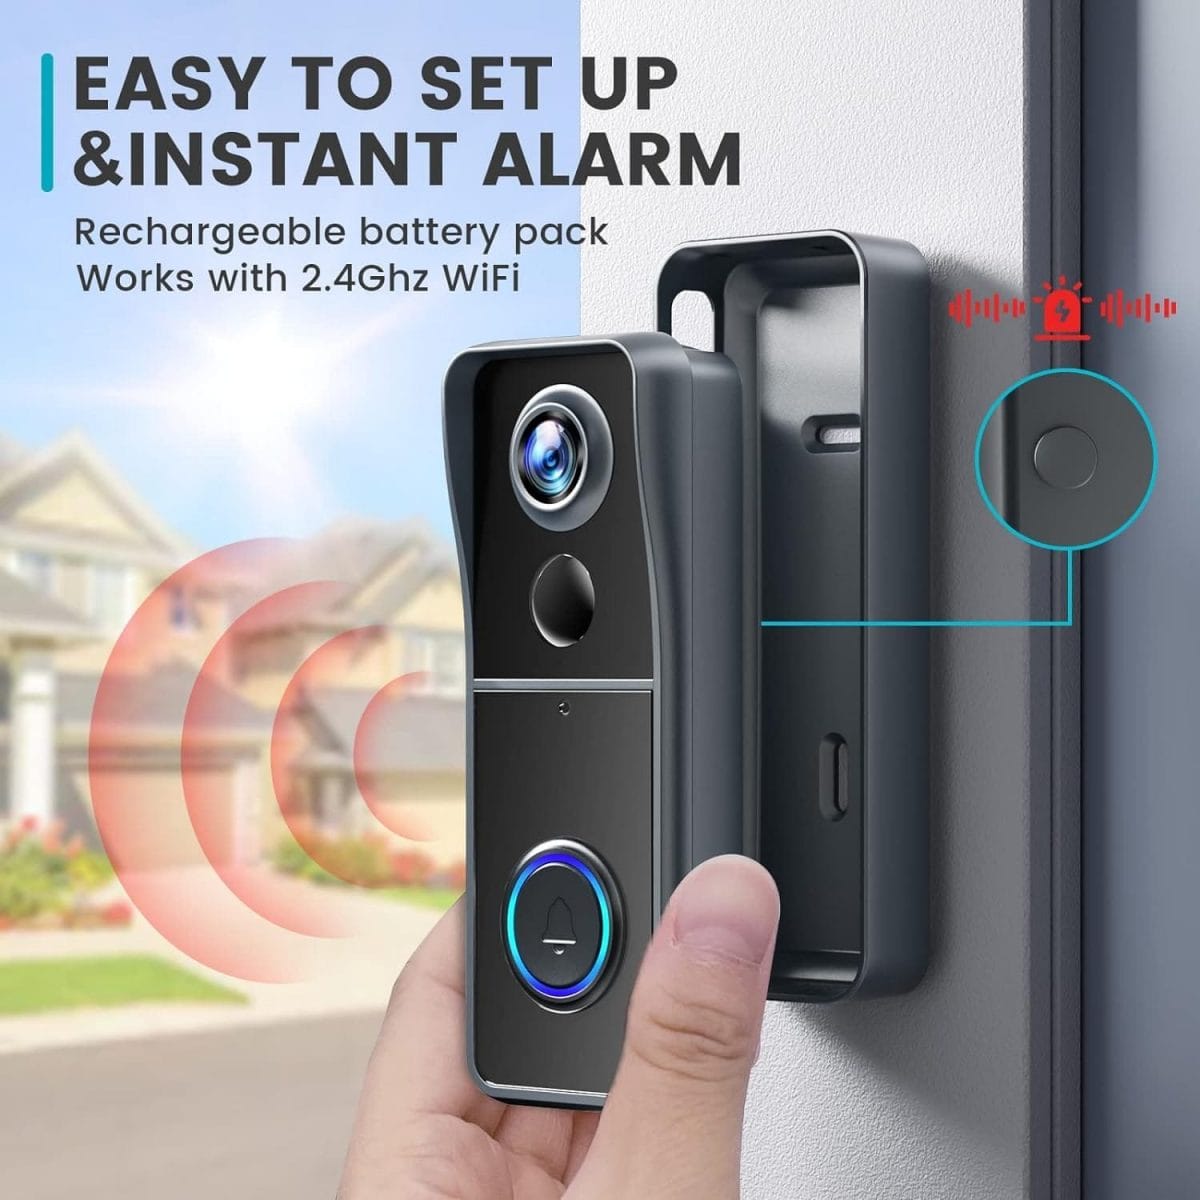 Morecam Doorbell Camera with Chime, Video Doorbell Wireless with Motion Zones Customization, Voice Changer, PIR Human Detection, No Monthly fees, 2.4Ghz WiFi Only, Battery Powered